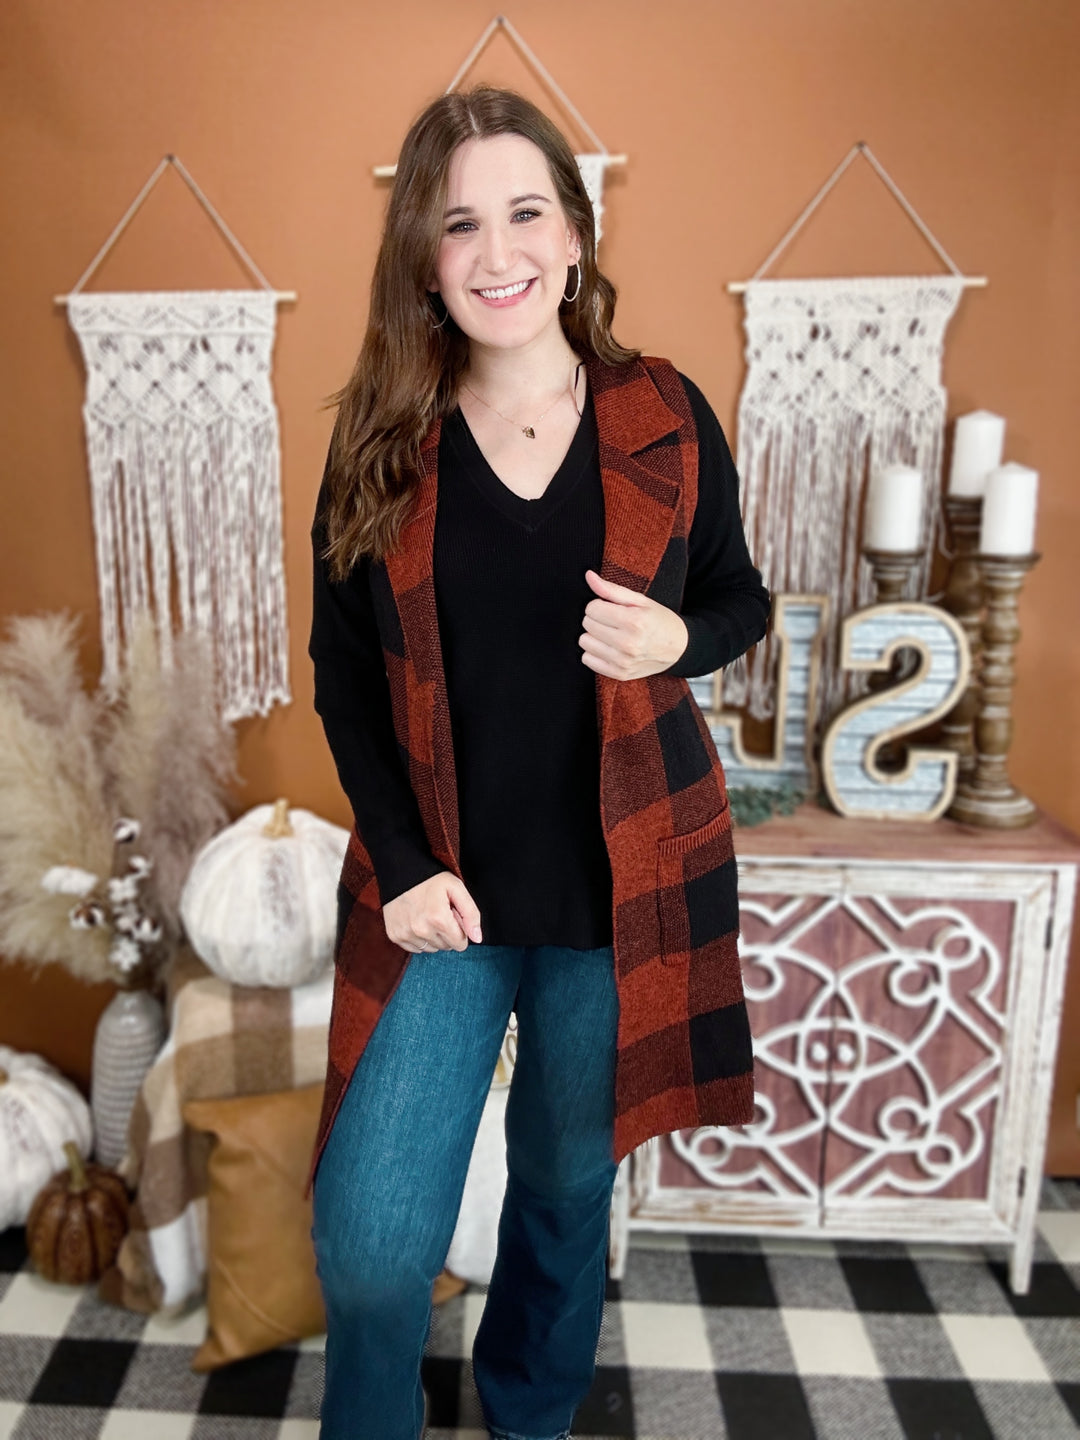 Find Your Path Buffalo Plaid Sweater Vest